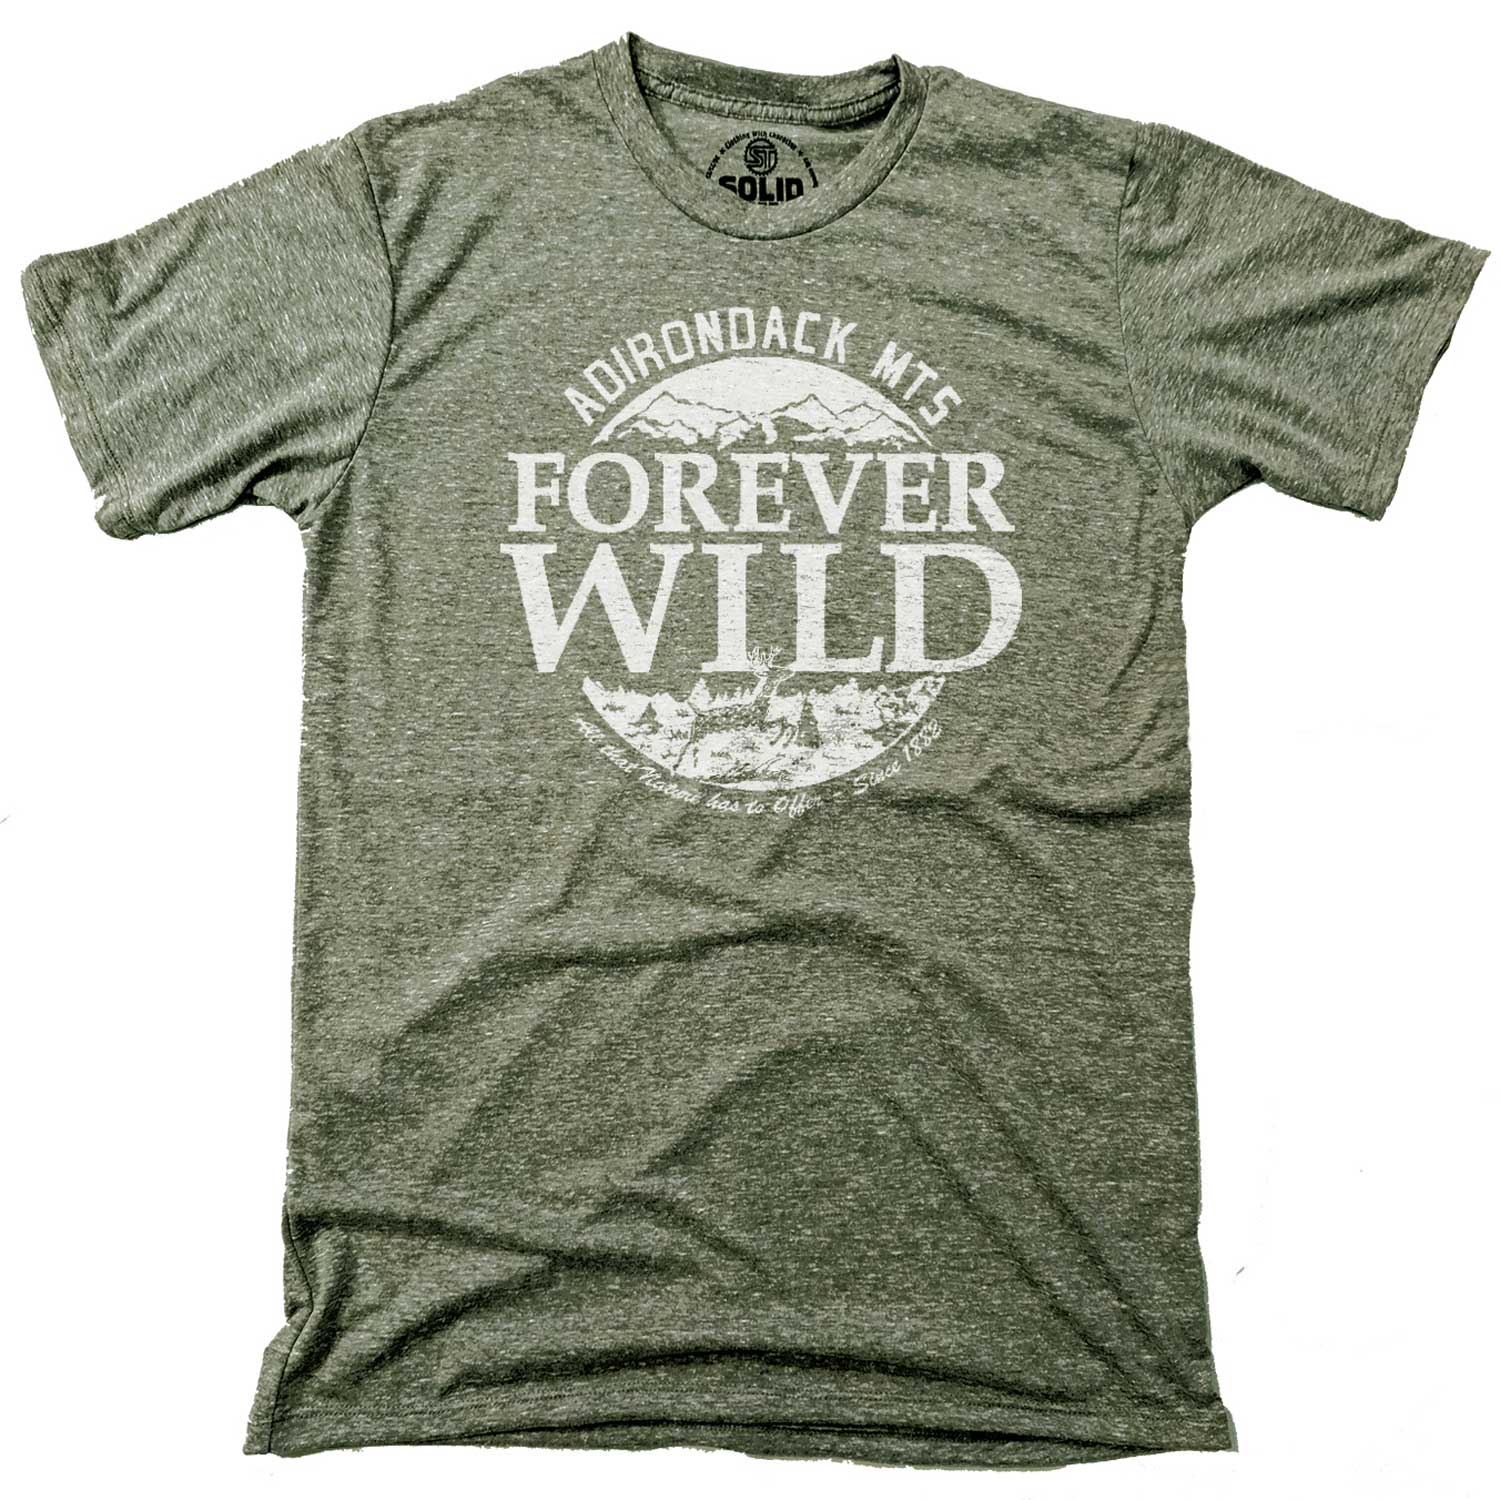 Men's Forever Wild Cool Graphic T-Shirt | Vintage Adirondack Mountains Tee on Model | Solid Threads